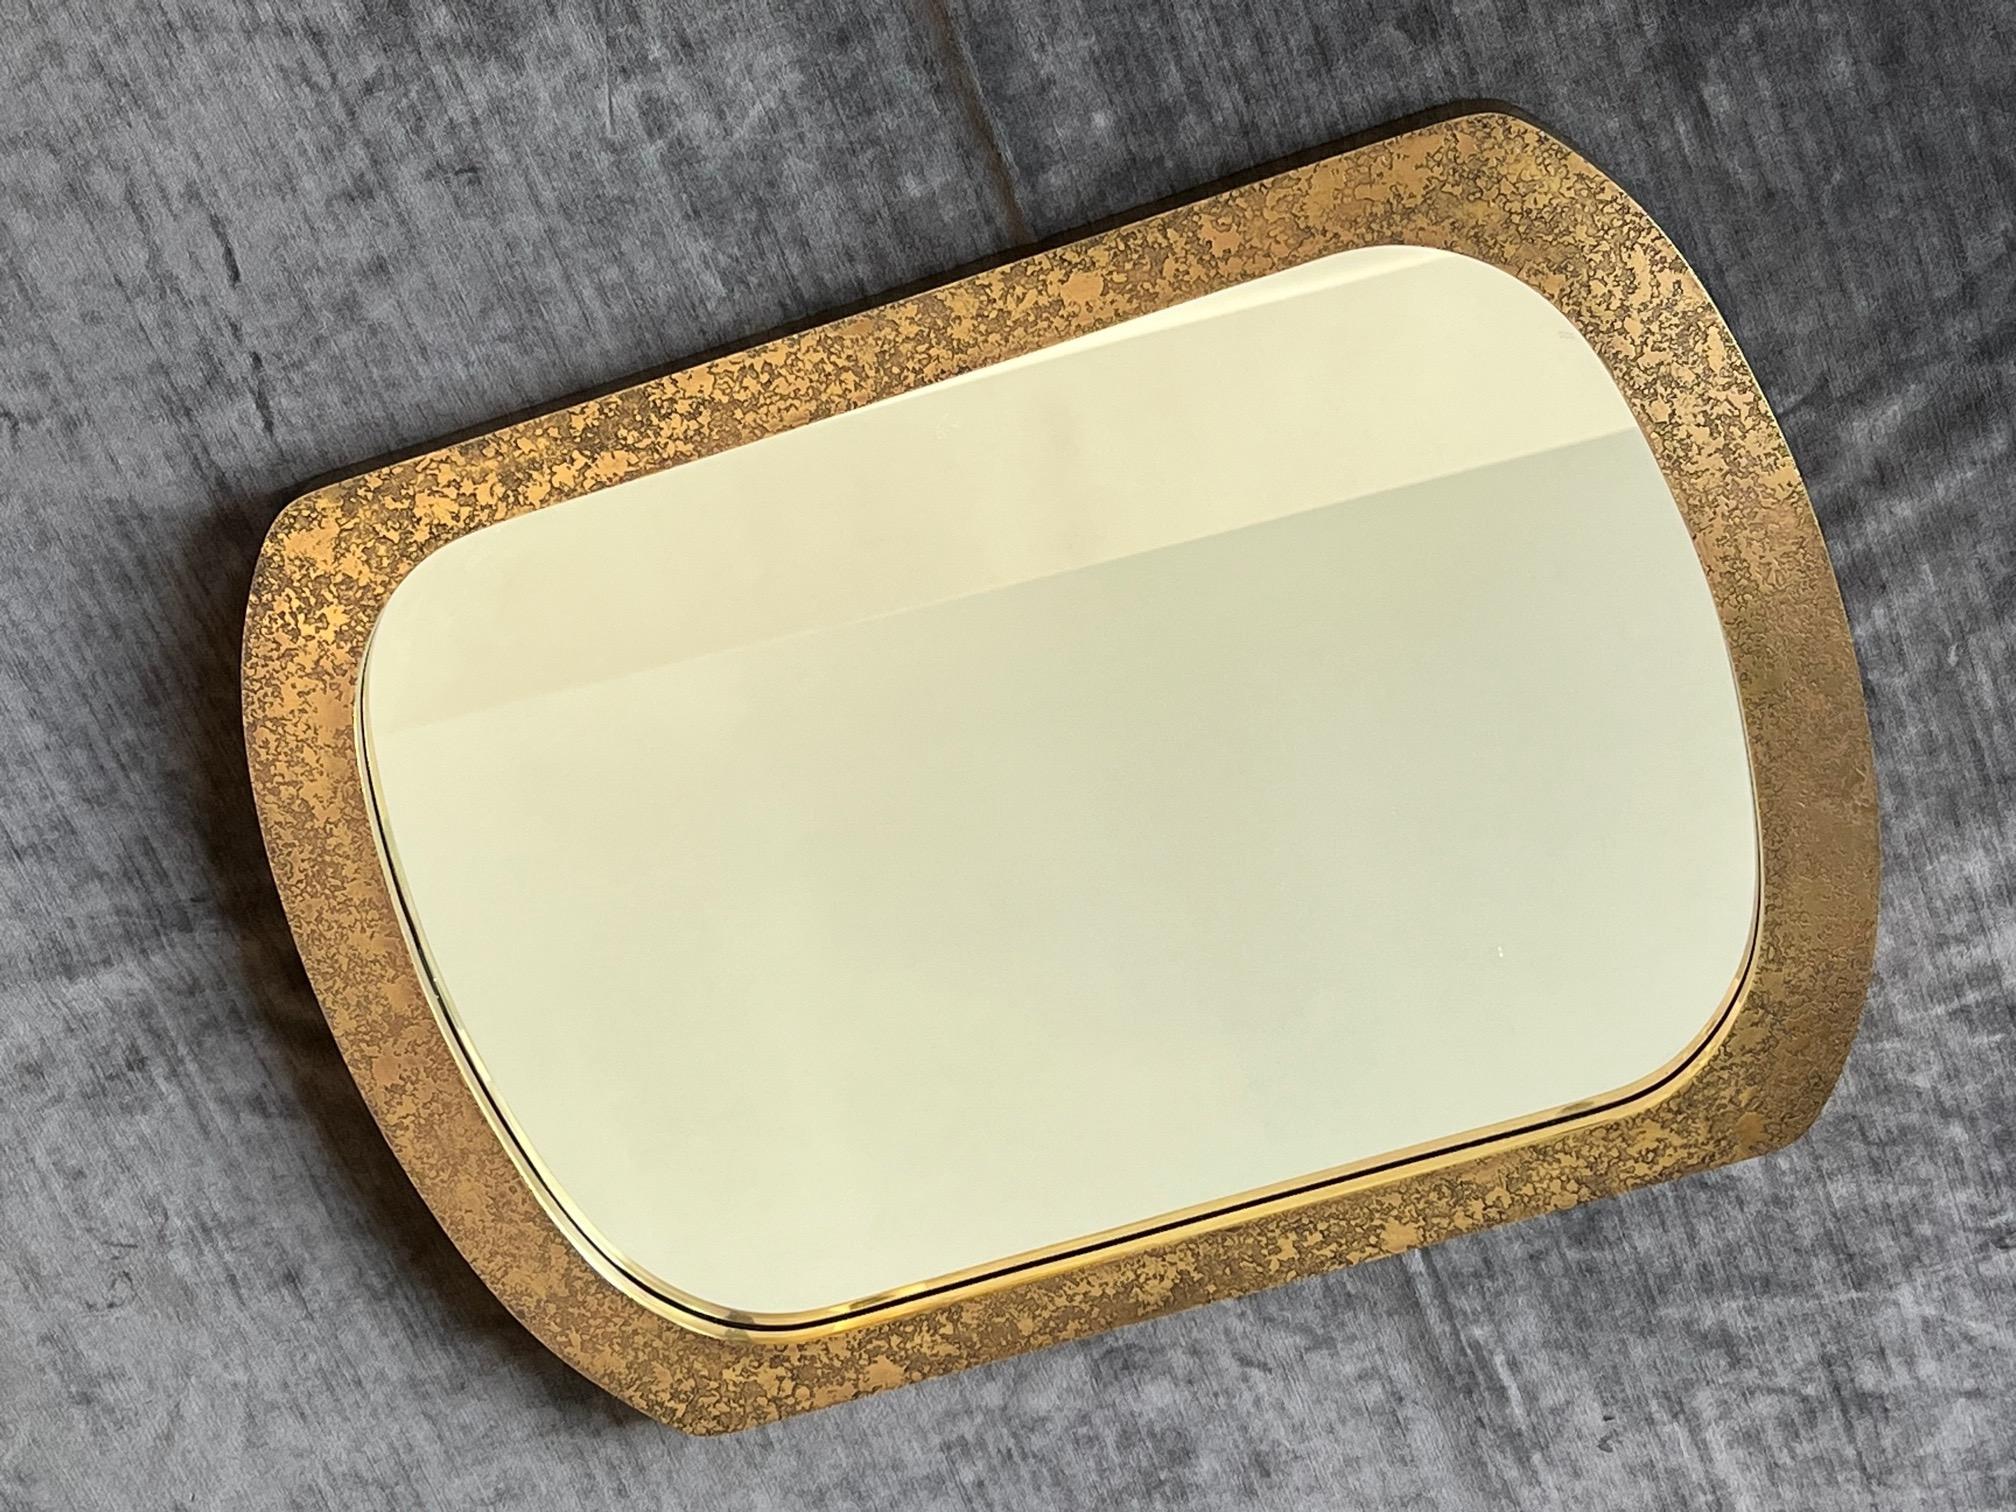 An unusual brass etched mirror, circa 1960s.